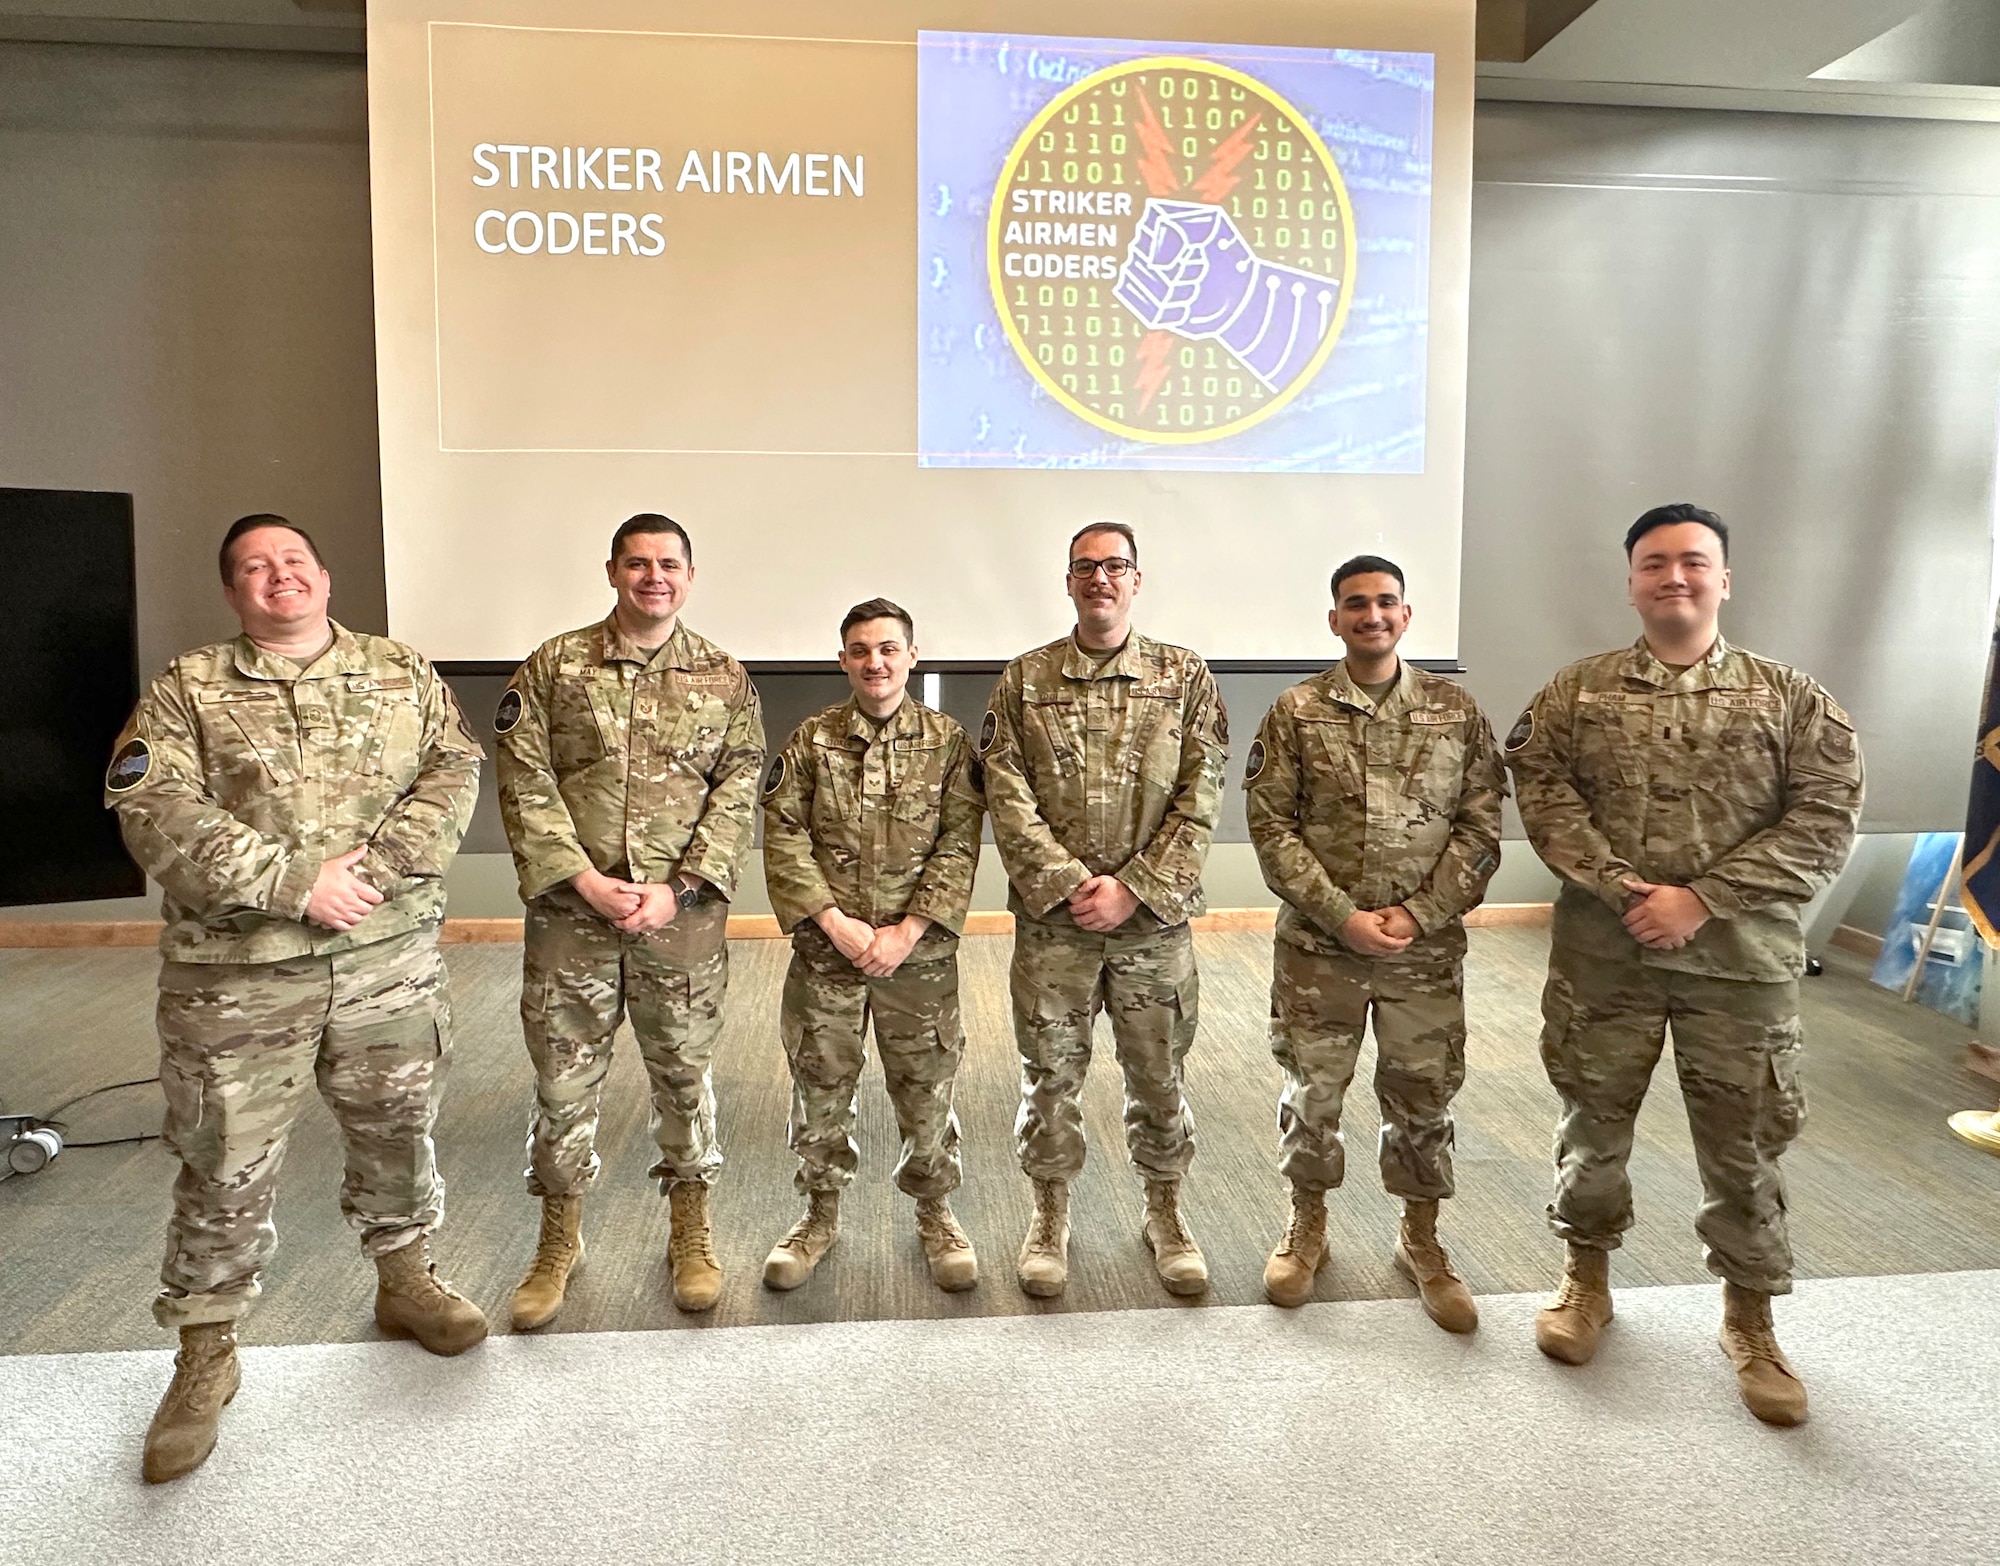 Airmen from various units belonging to Air Force Global Strike Command pose for a photo after graduating from the command’s Striker Airmen Coder program in Bossier City, Louisiana, on March 12, 2024. The team was the sixth cohort of Airmen to finish the six-month program, administered by the Cyber Innovation Center through a partnership intermediary agreement with AFGSC, that is aimed at training Airmen in software development, data analytics and other essential coding skill; equipping them to innovate and efficiently solve technical problems in their own units. (U.S. Air Force photo by Sean Green)